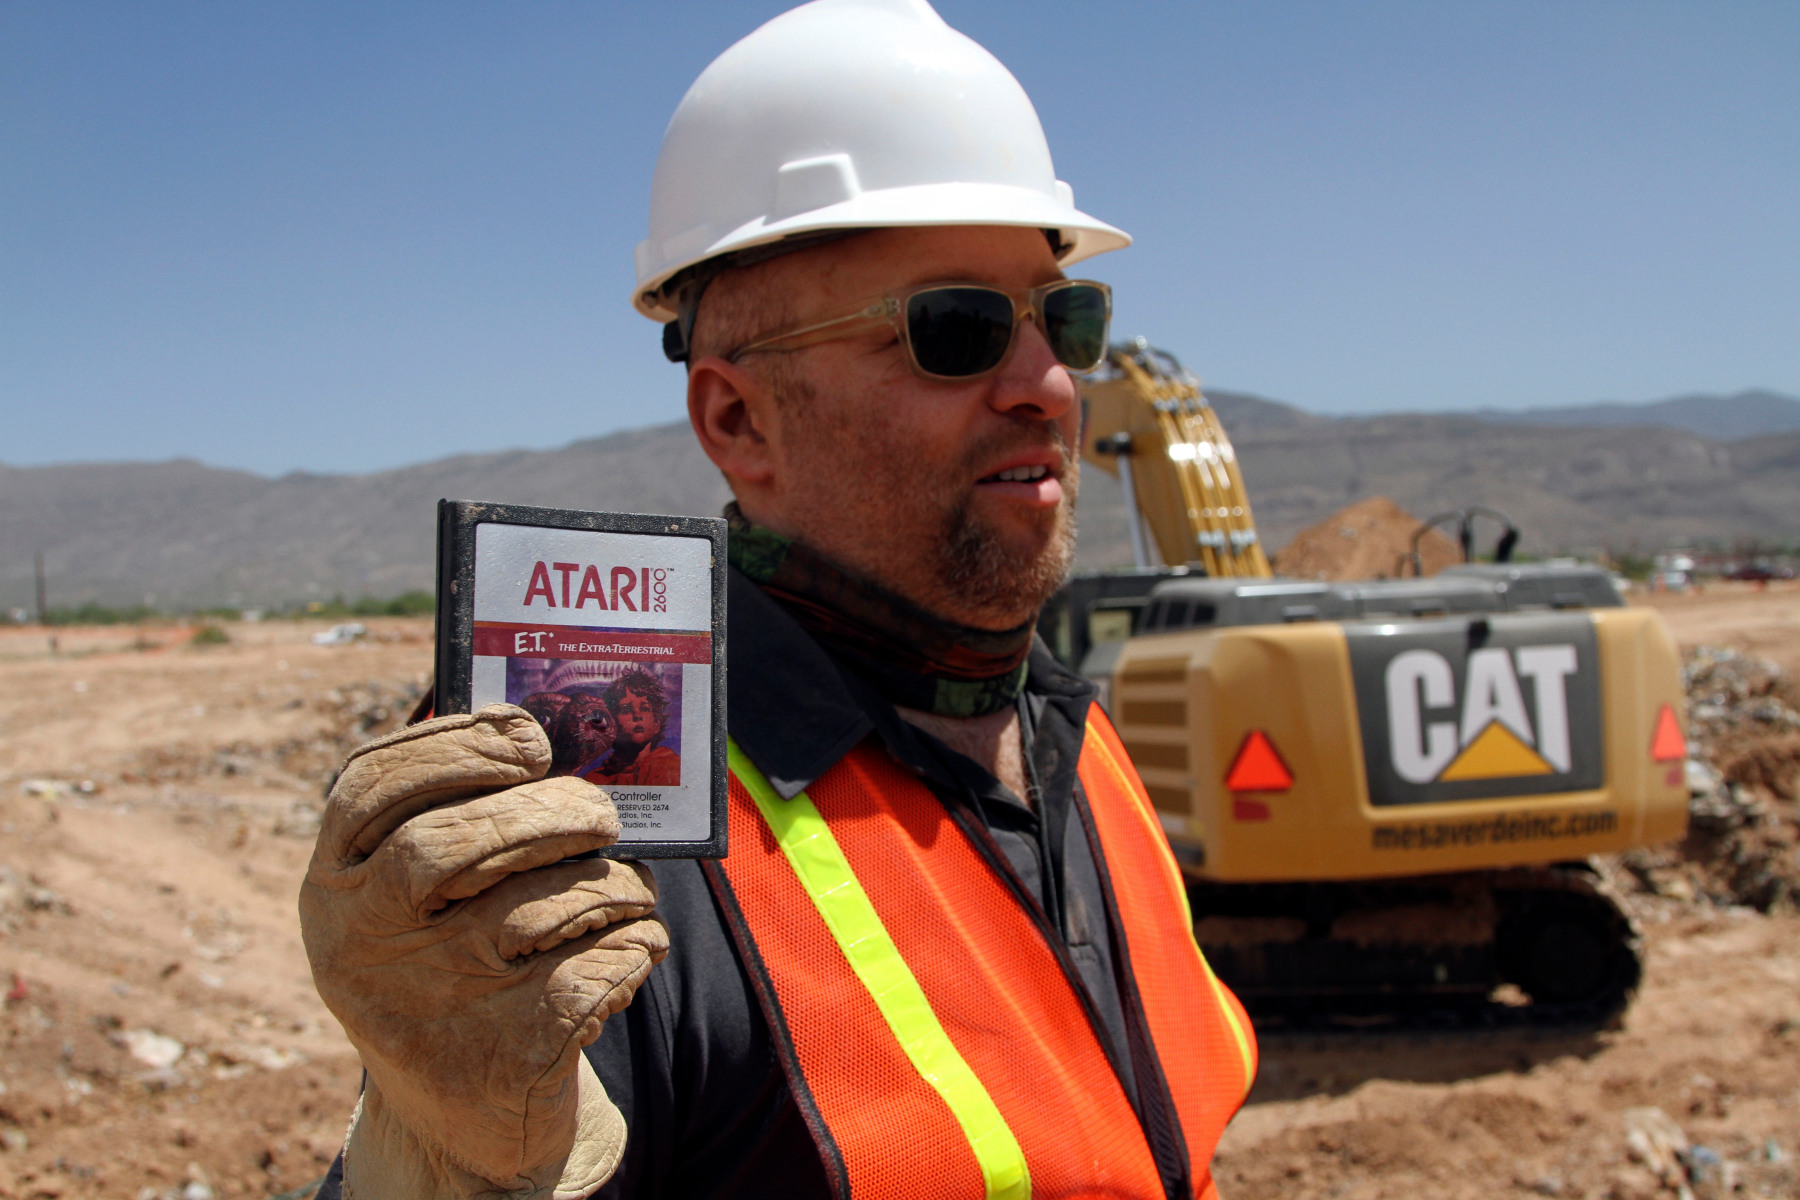 guy holding up uncovered atari e.t. game